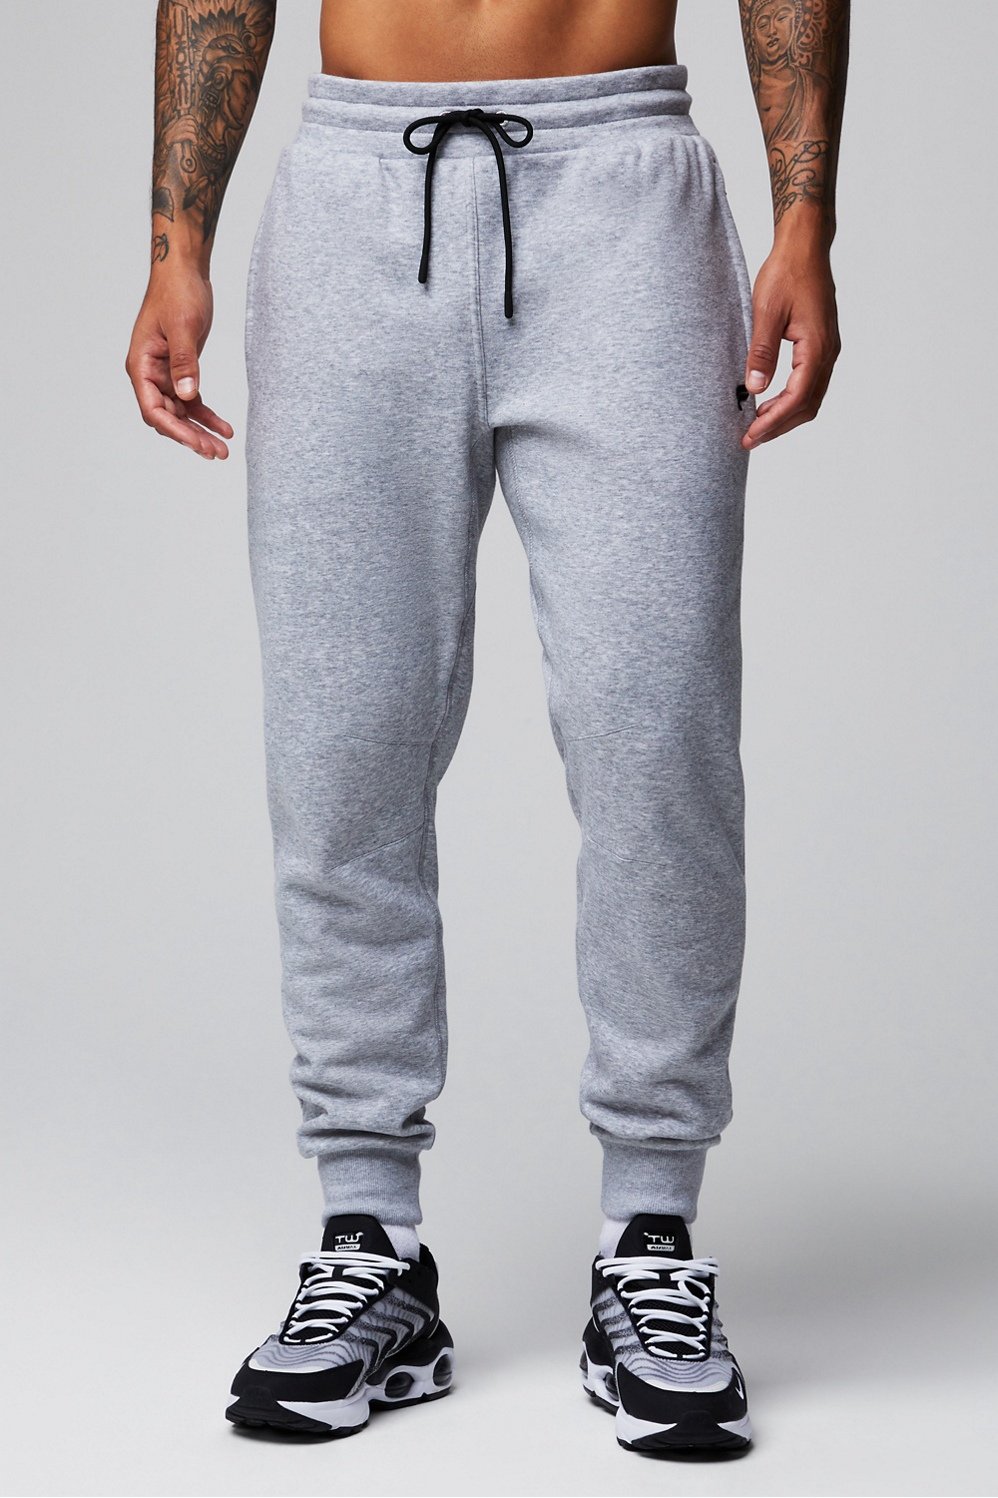 Sweatpants for Exercise: Unveiling the Benefits of Workout Comfort